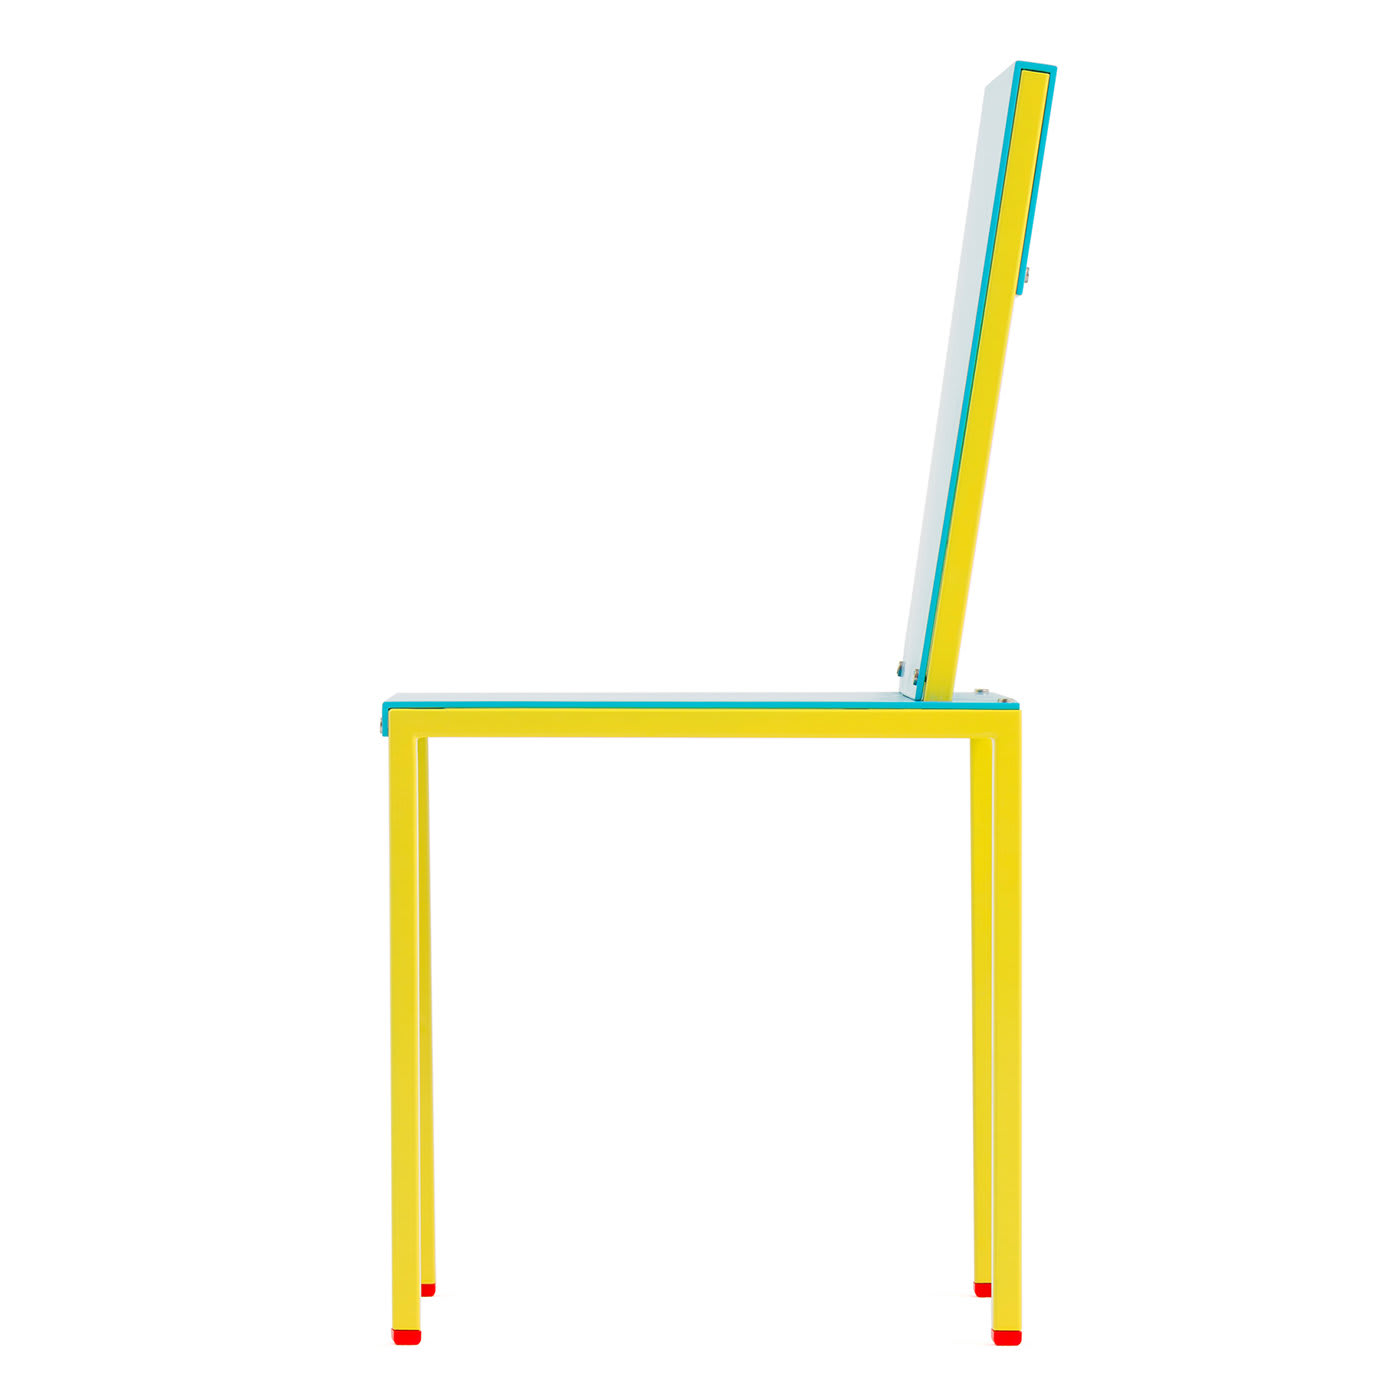 Primula Chair by George Sowden - Post Design - Memphis